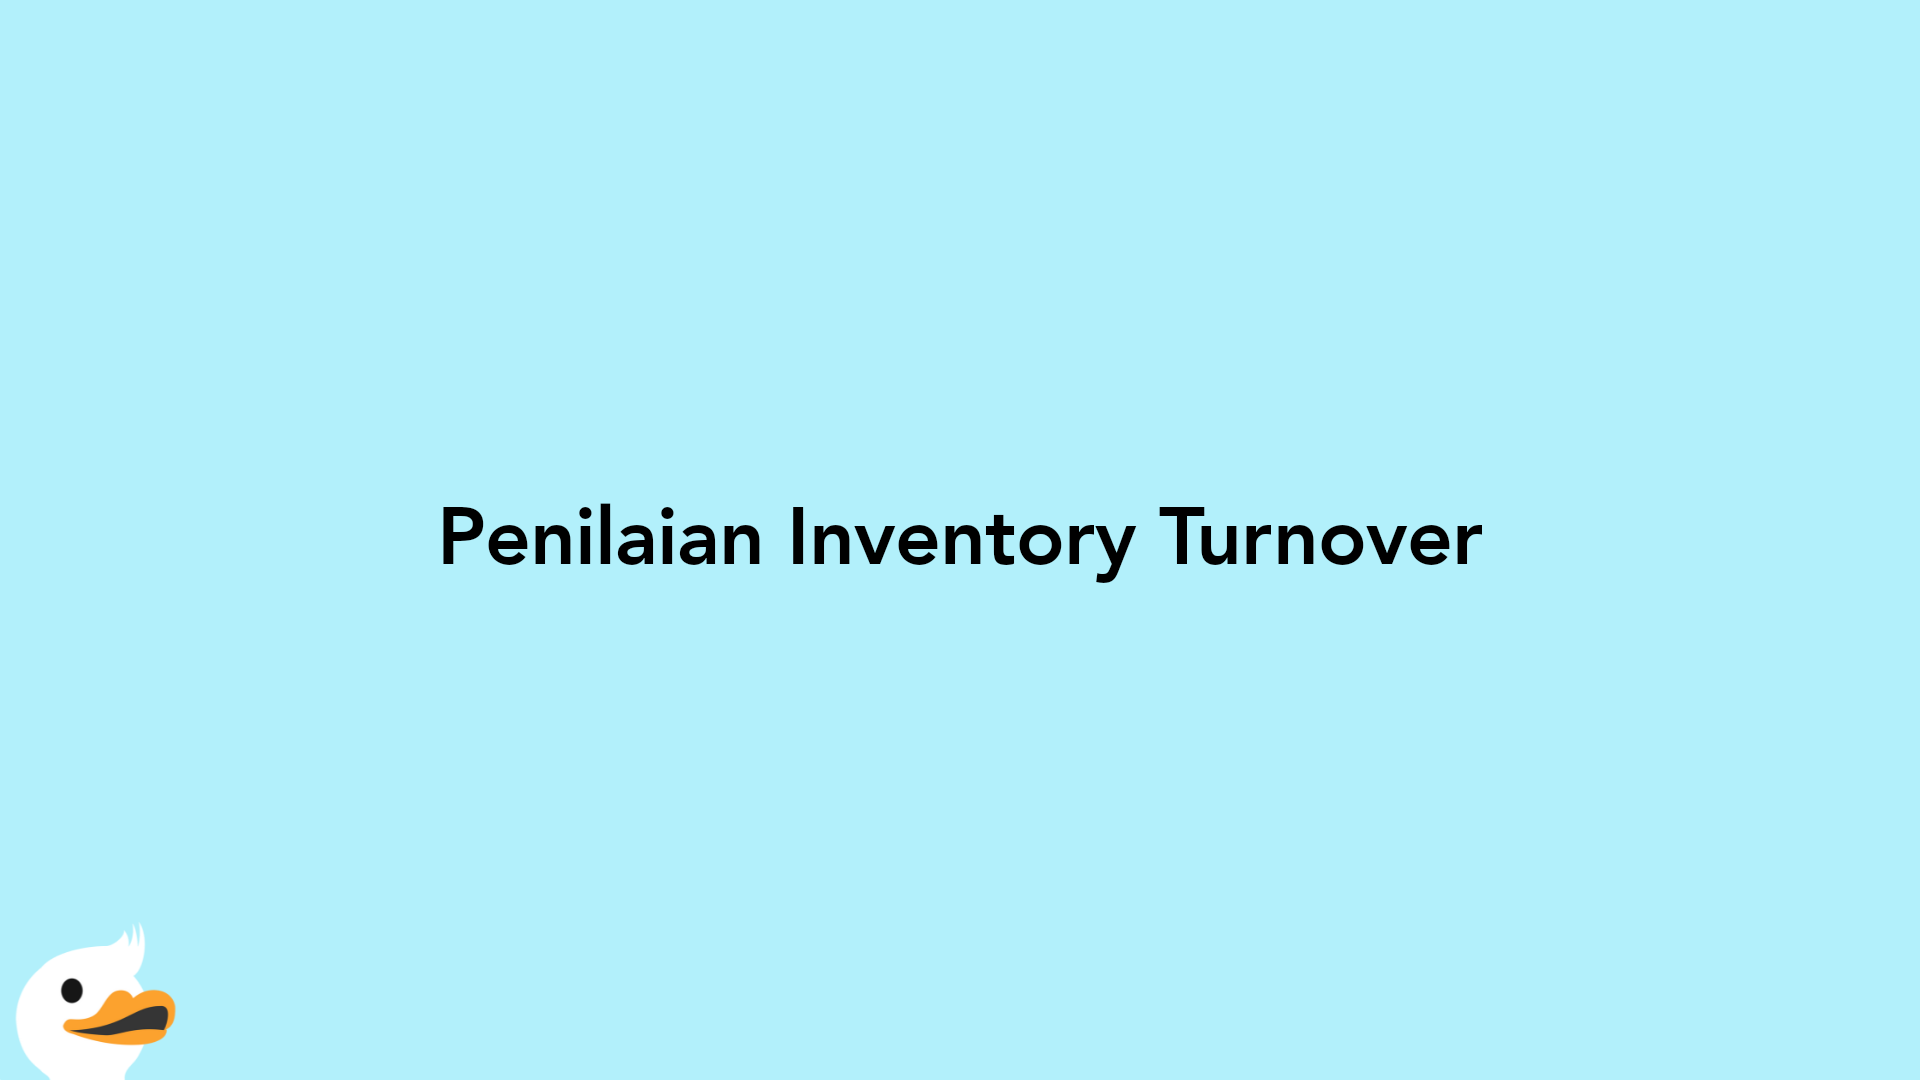 Penilaian Inventory Turnover